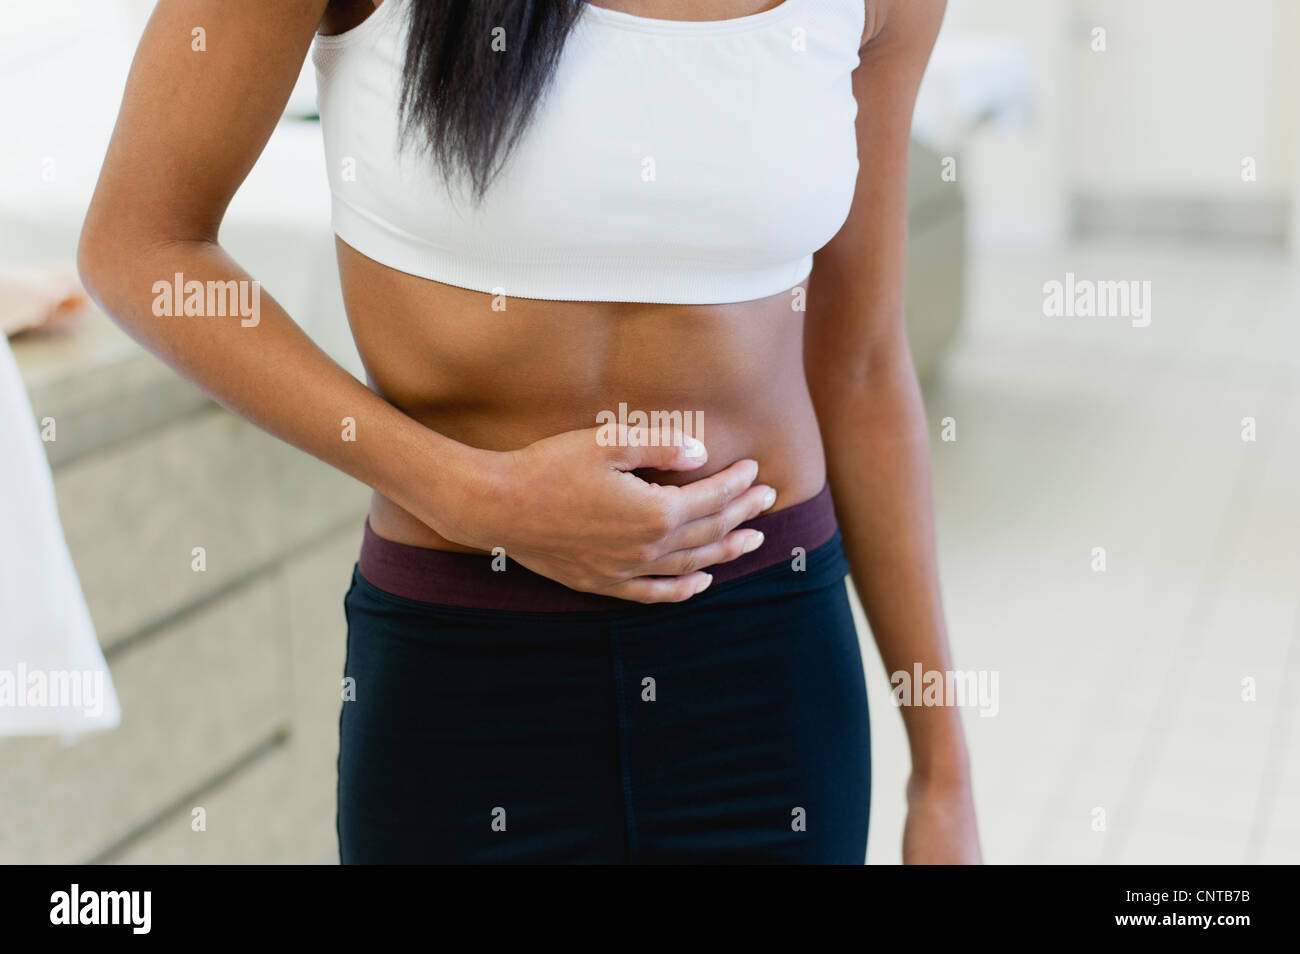 Woman experiencing abdominal pain, mid section Stock Photo